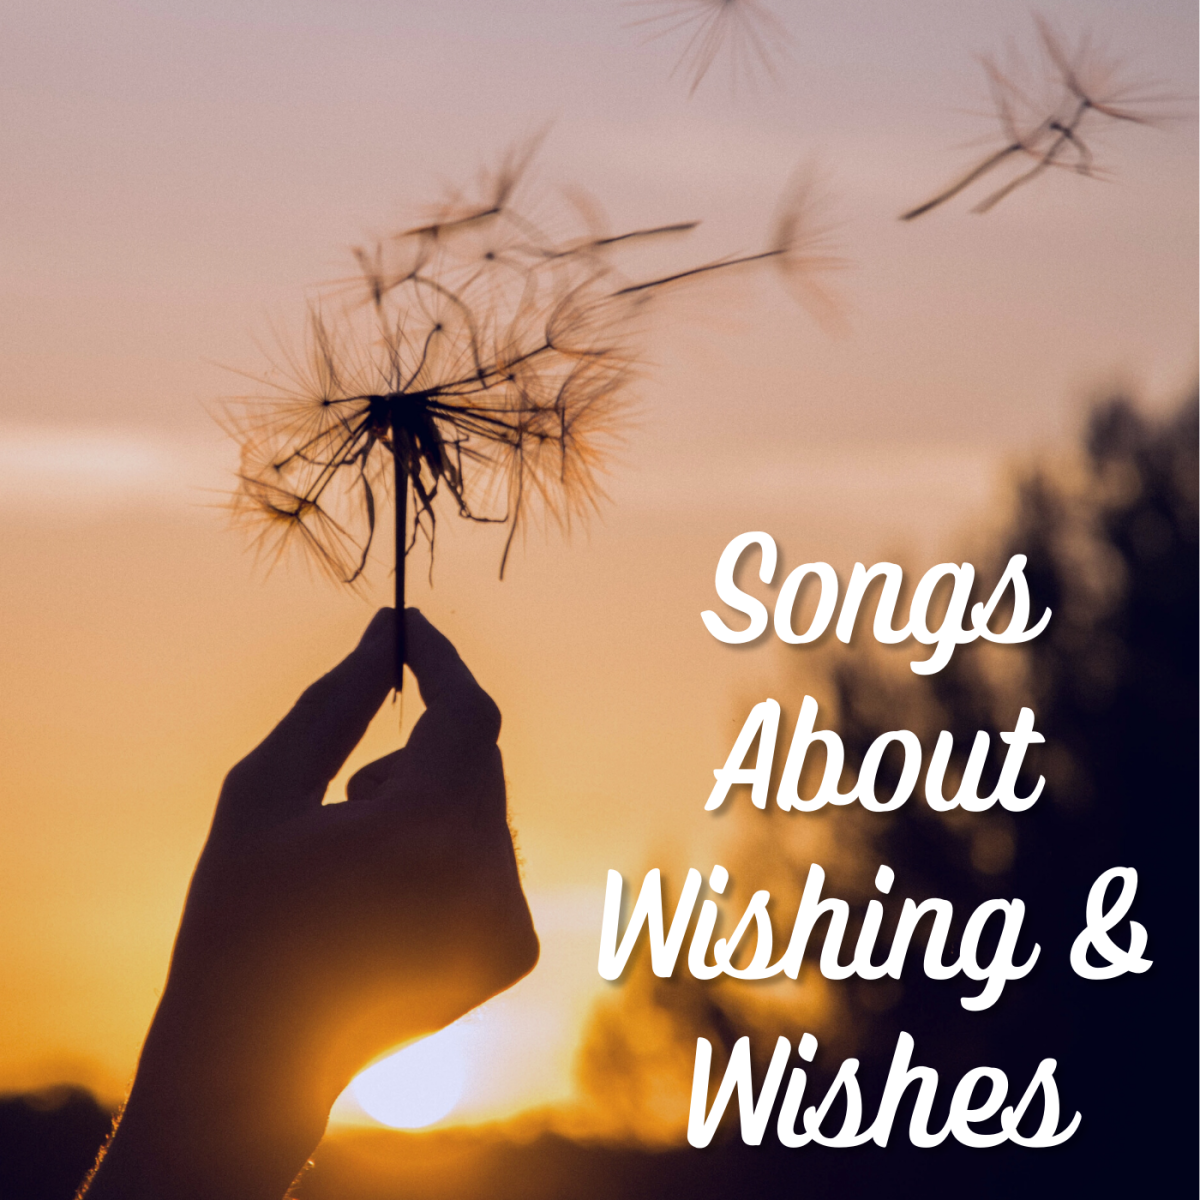 You have to wish for what you want before you can make it come true. Make a playlist of pop, rock, country, and R&B songs about wishes and wishing.